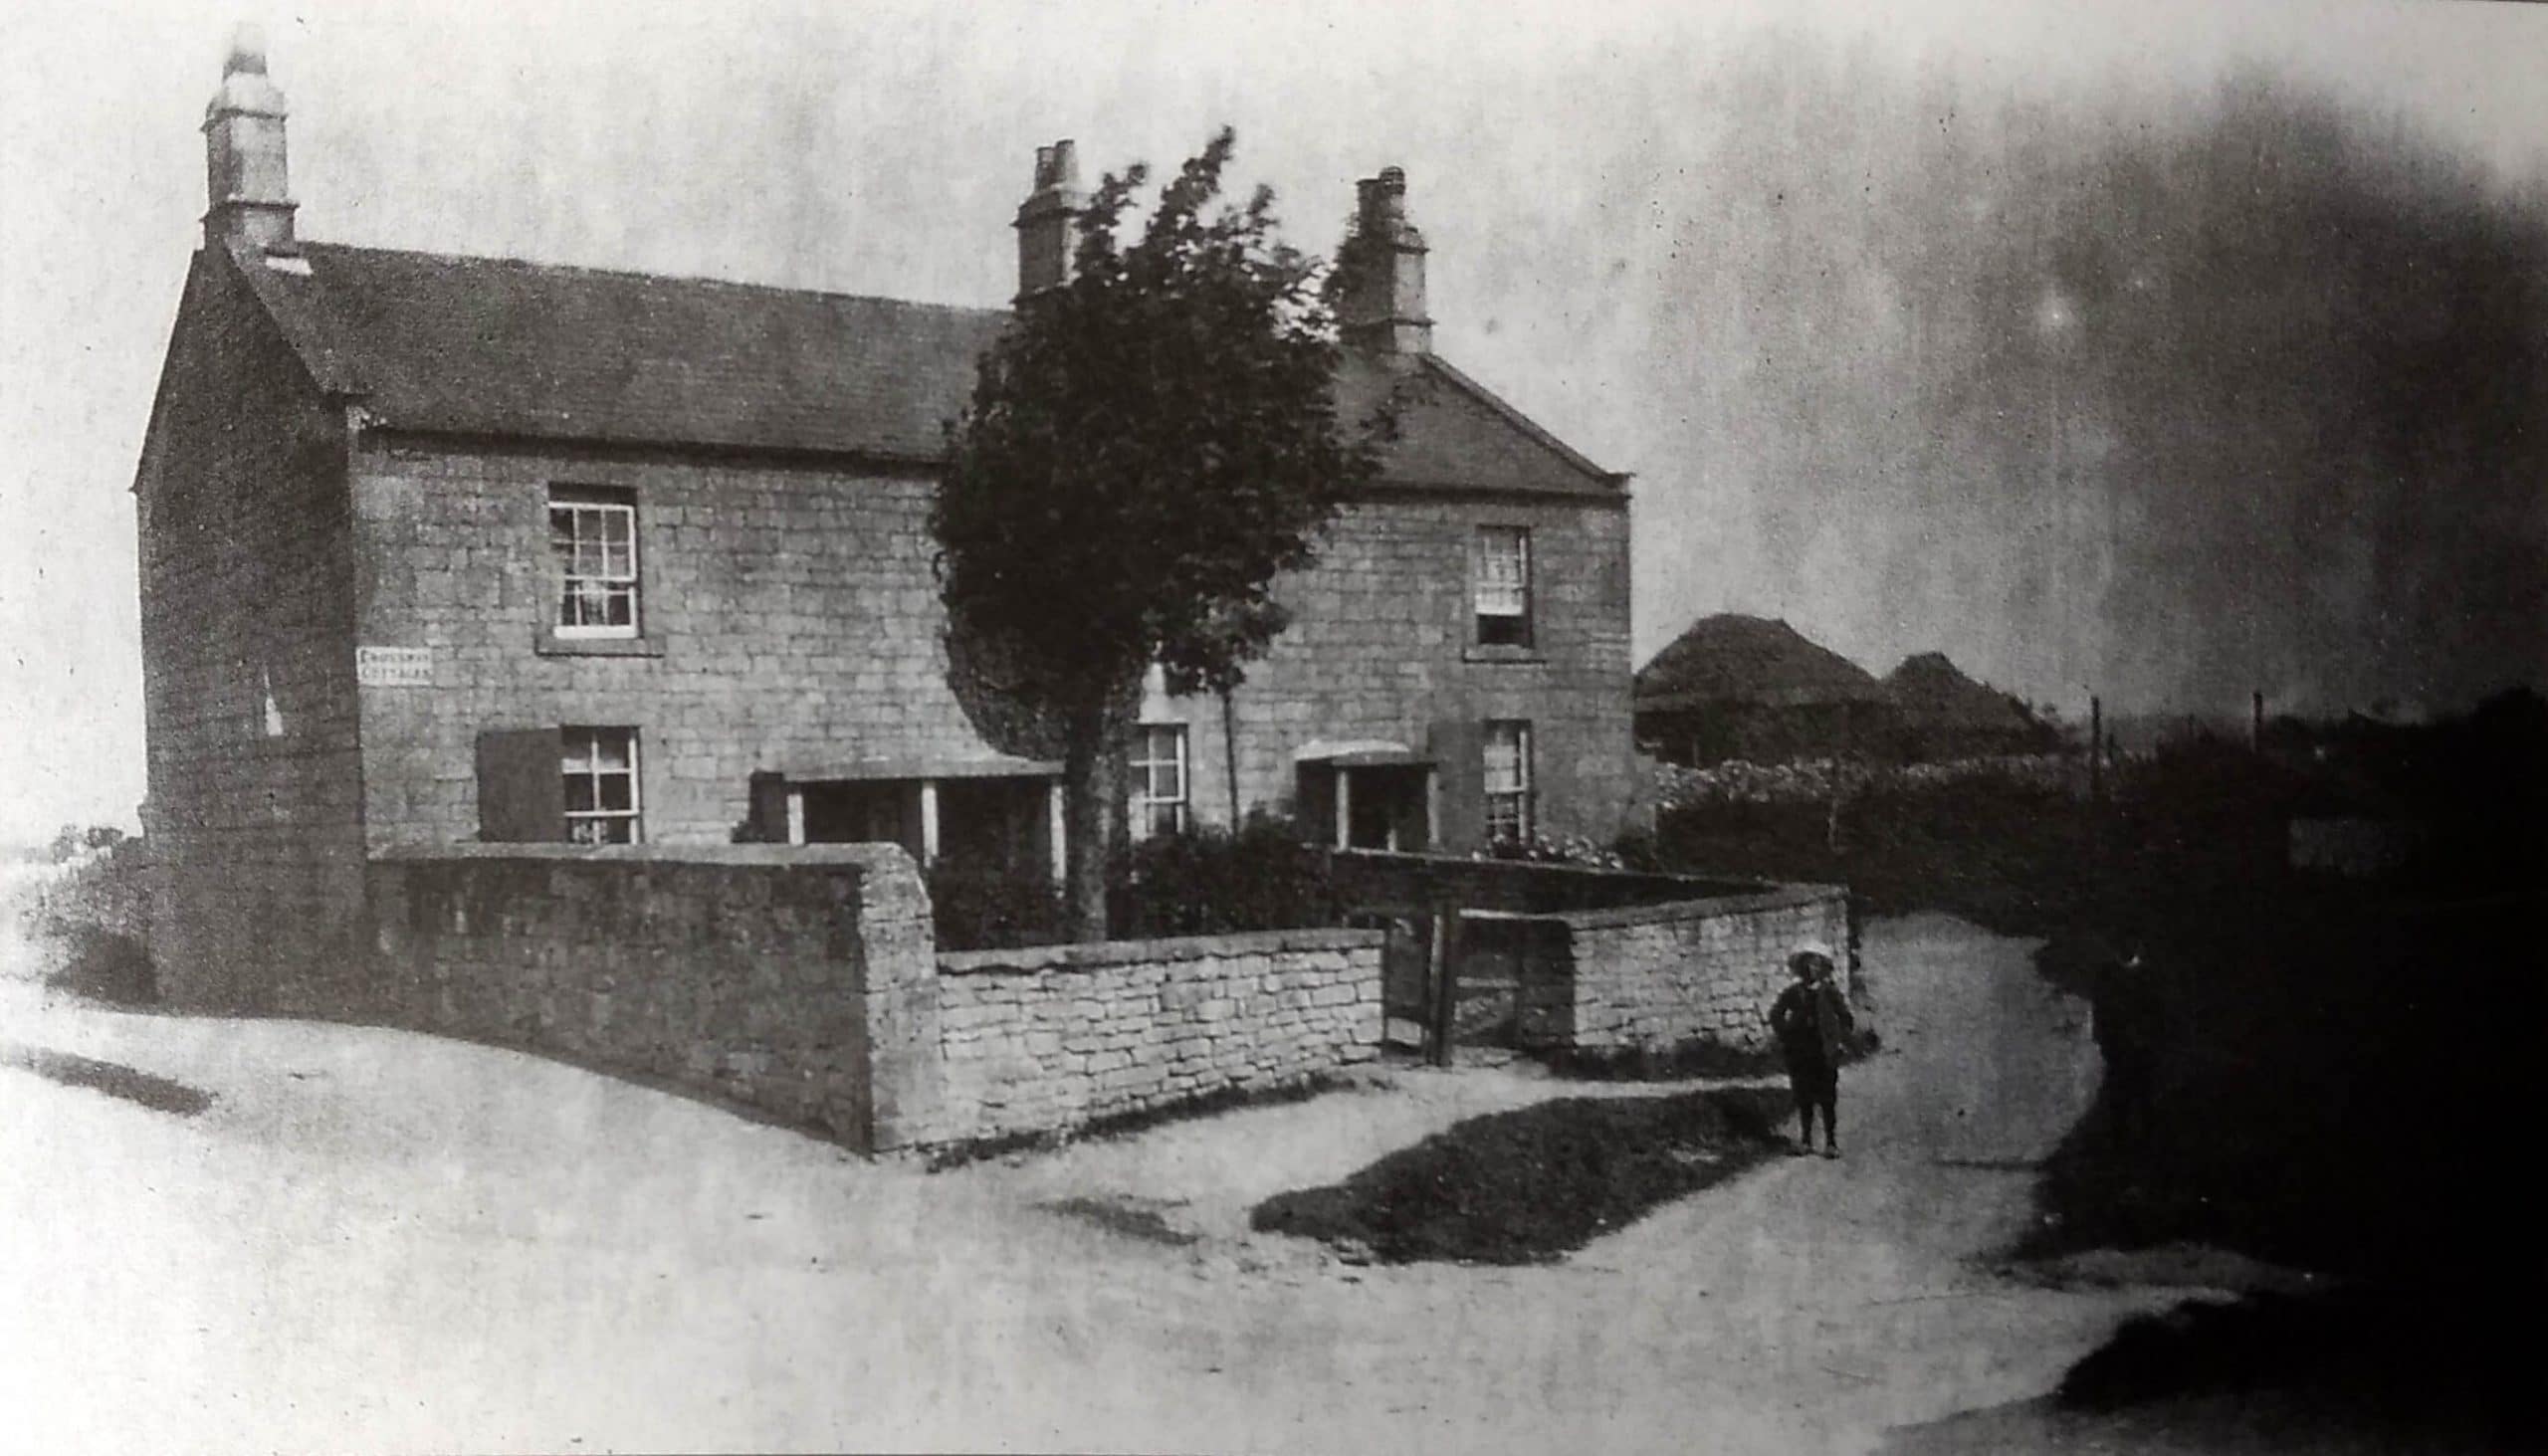 Crossway cottages, Entry Hill, Combe Down, about 1906